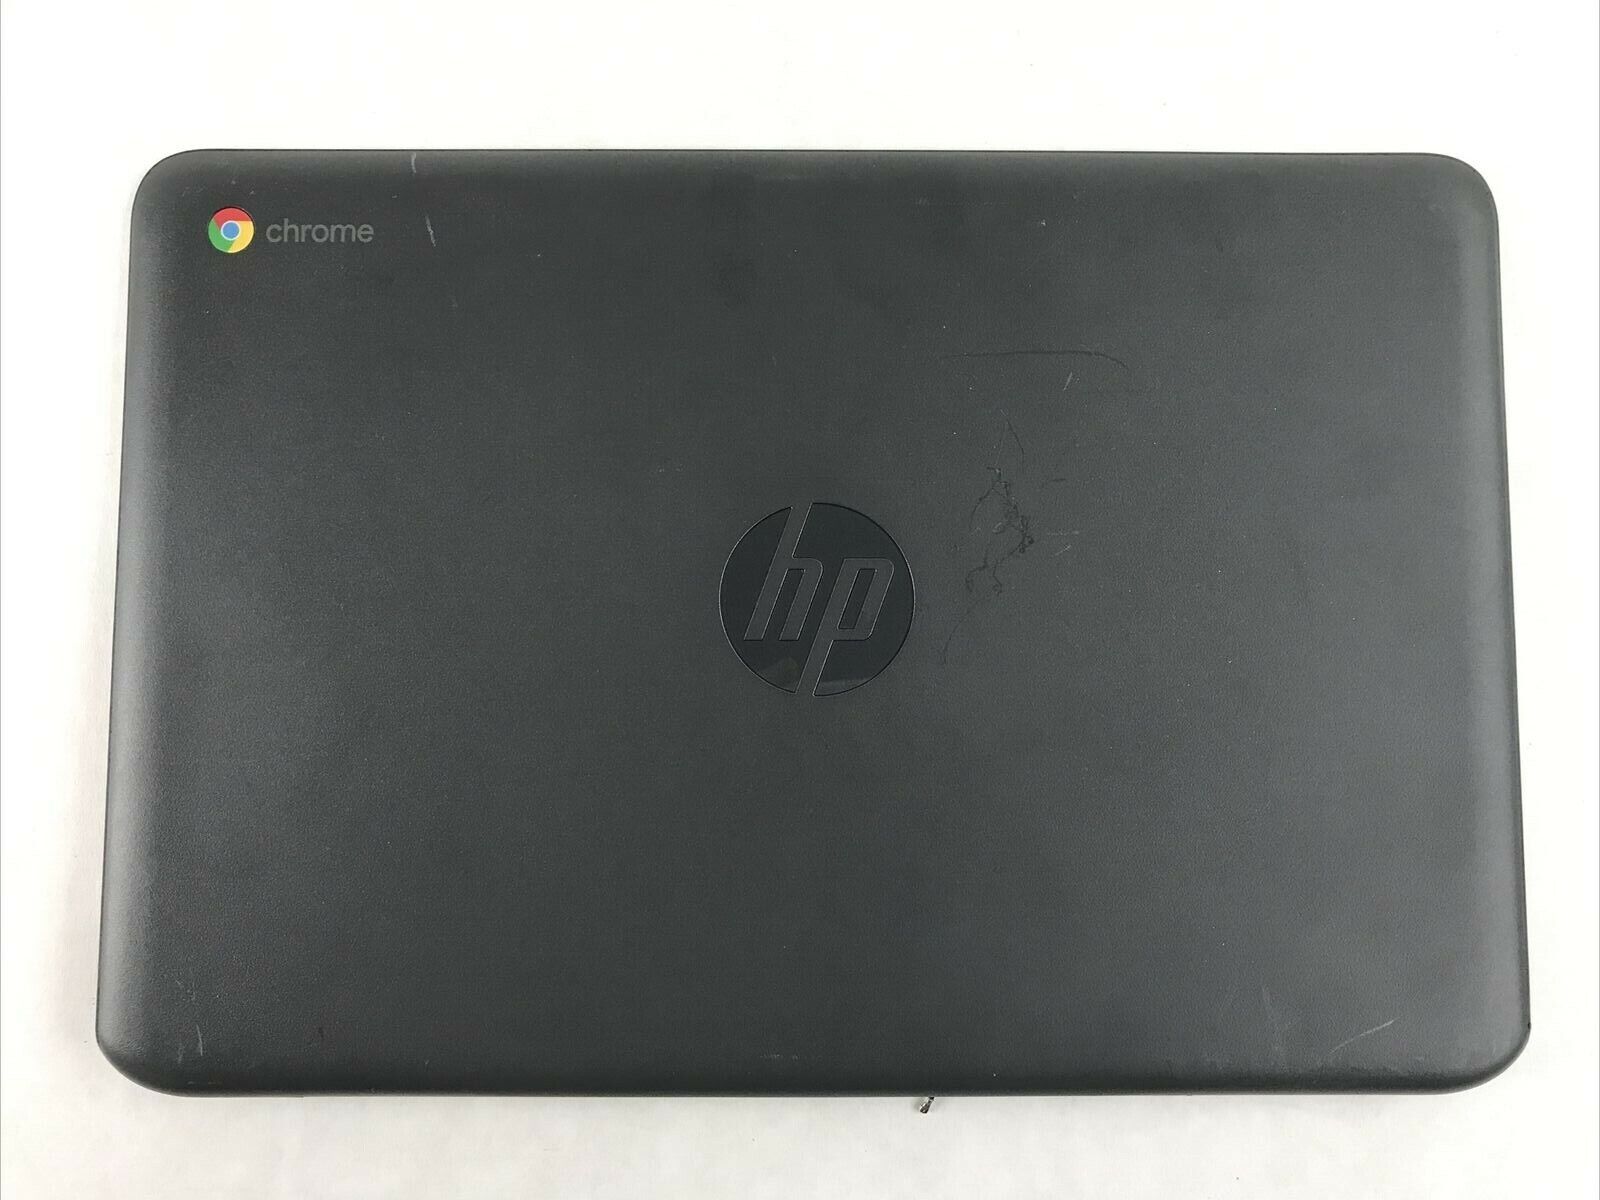 HP Chromebook 11 G6 EE LCD Back Cover L14908-001 w/ Hinges